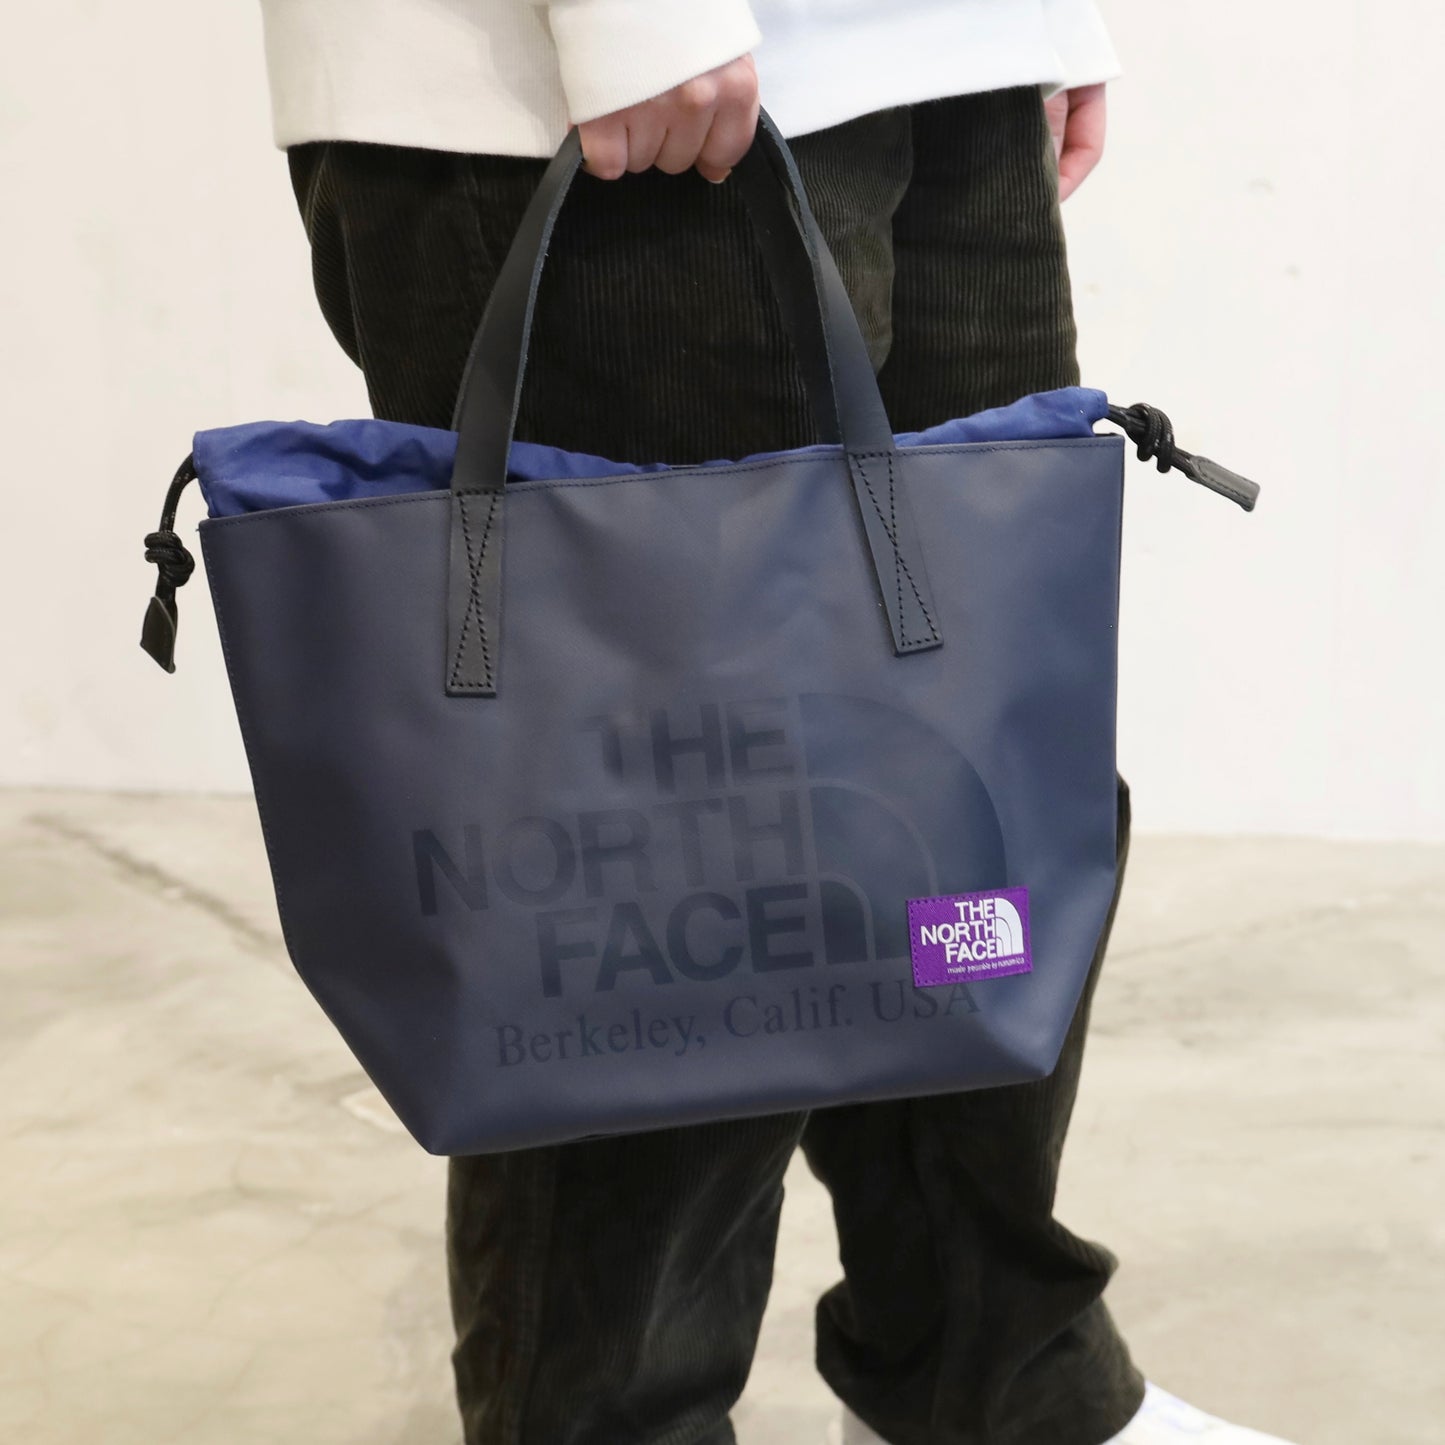 TPE Small Tote Bag - NAVY